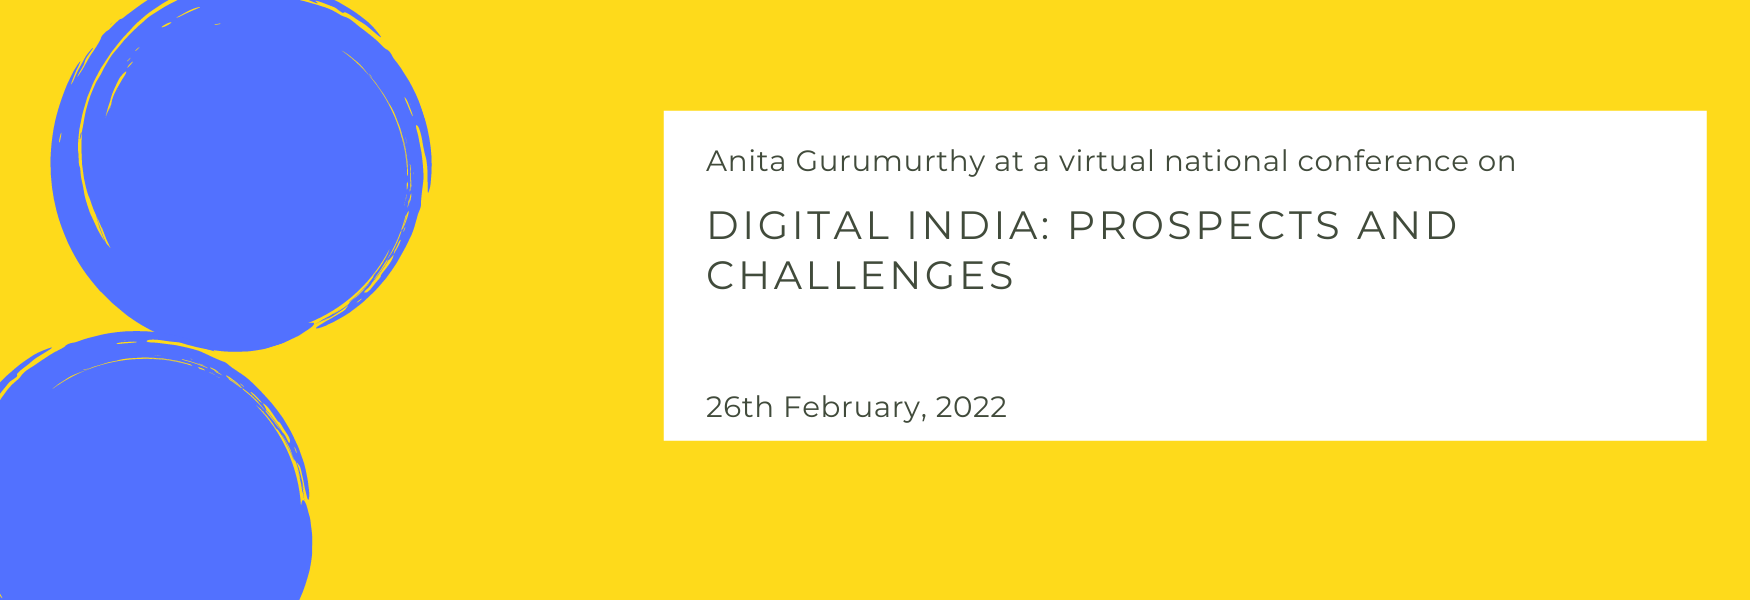 Digital India: Prospects and Challenges